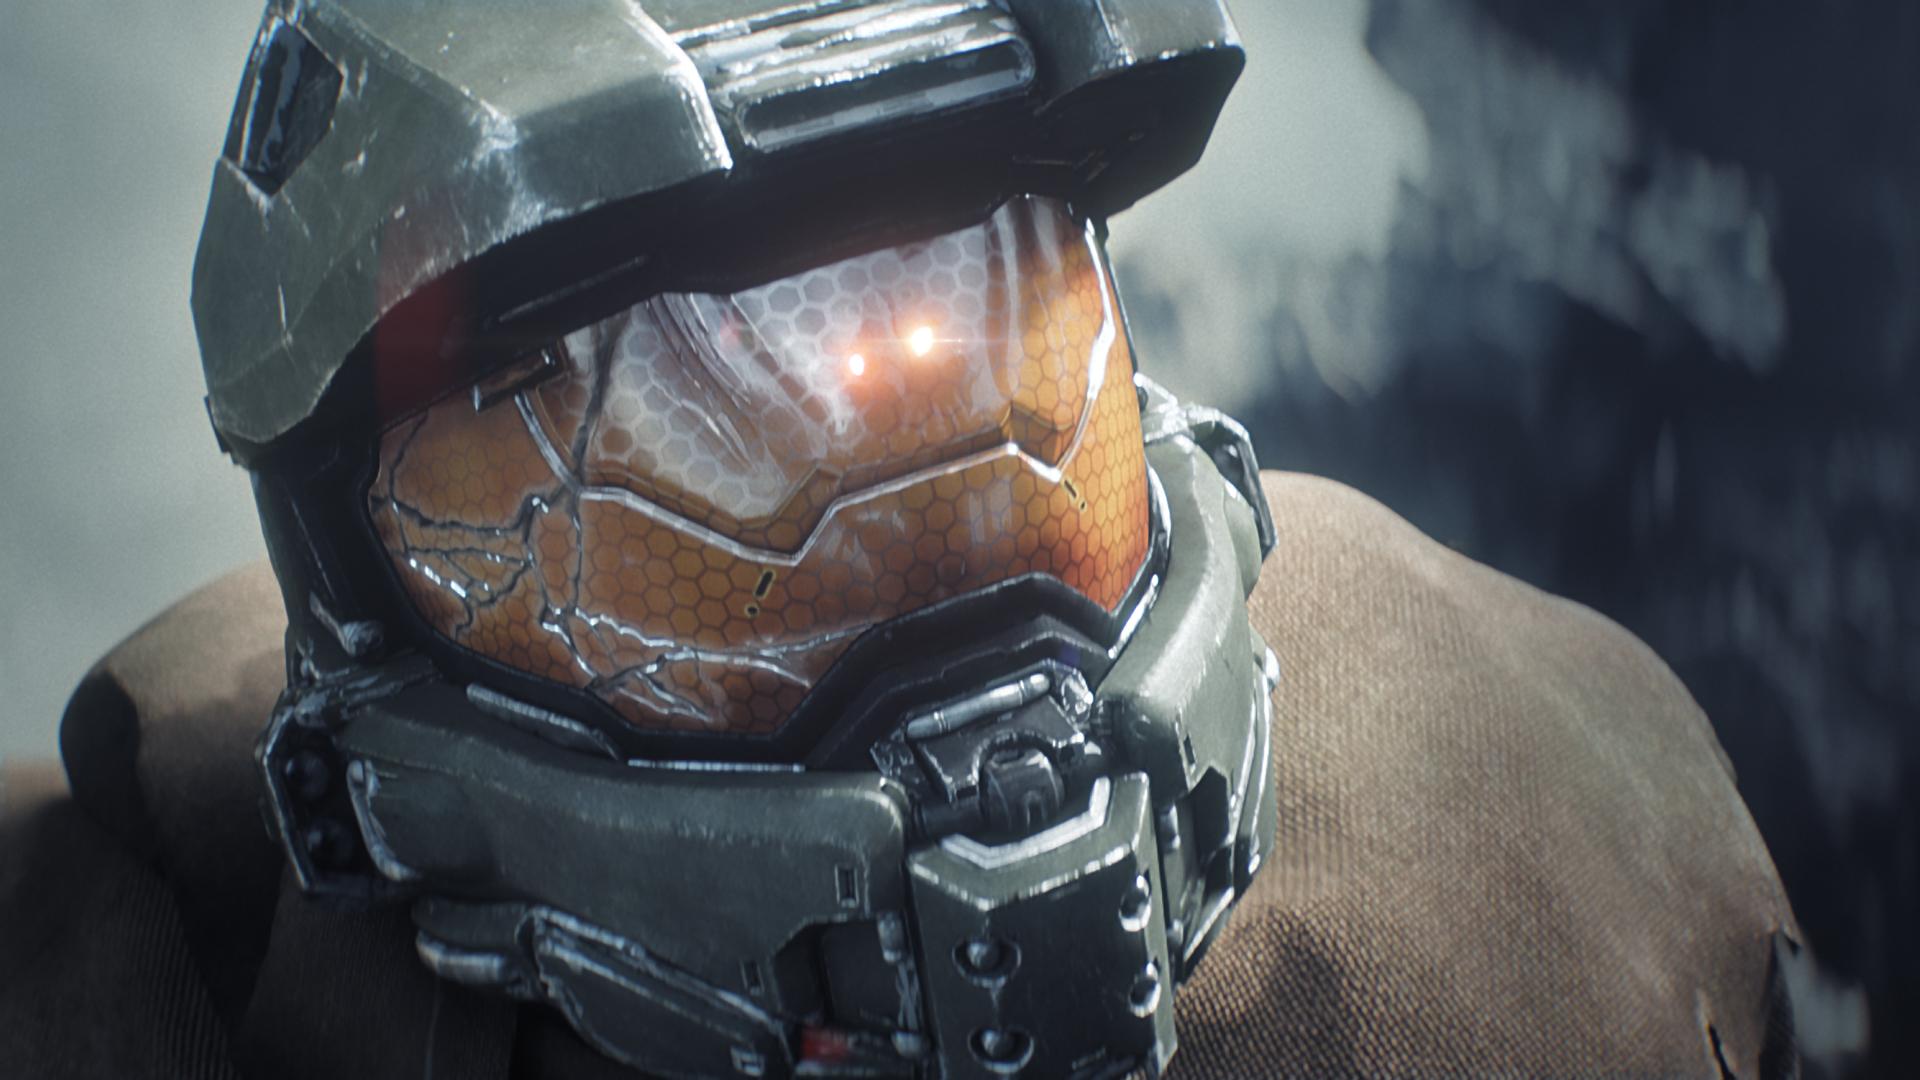 http://www.digitaltrends.com/wp-content/uploads/2013/06/Halo-Xbox-One-Reveal-04.jpg